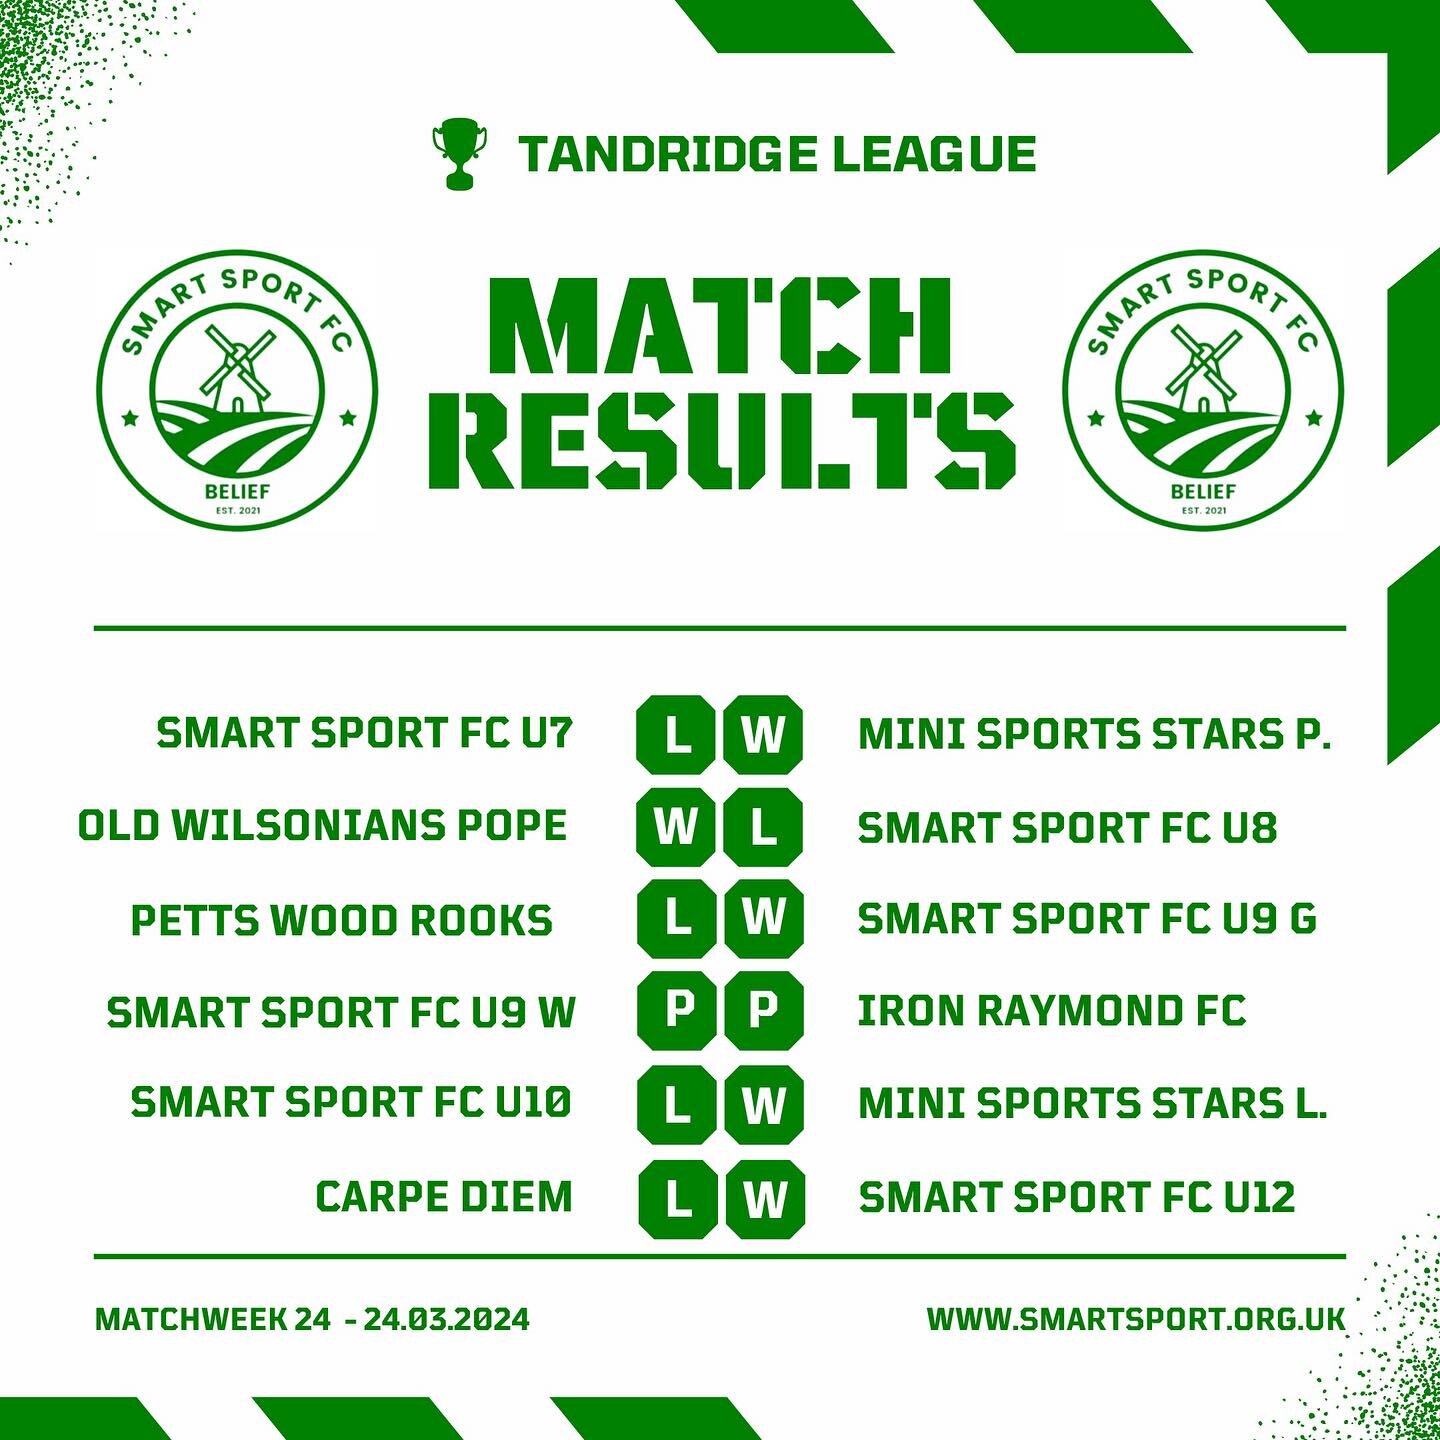 Match week 24 results and highlights #football #fussball #futbol #soccer #grassroots #teamwork #togetherness #social #unity #grassrootsfootball #health #active #community #exercise #fitness #charity #london #croydon #shirley